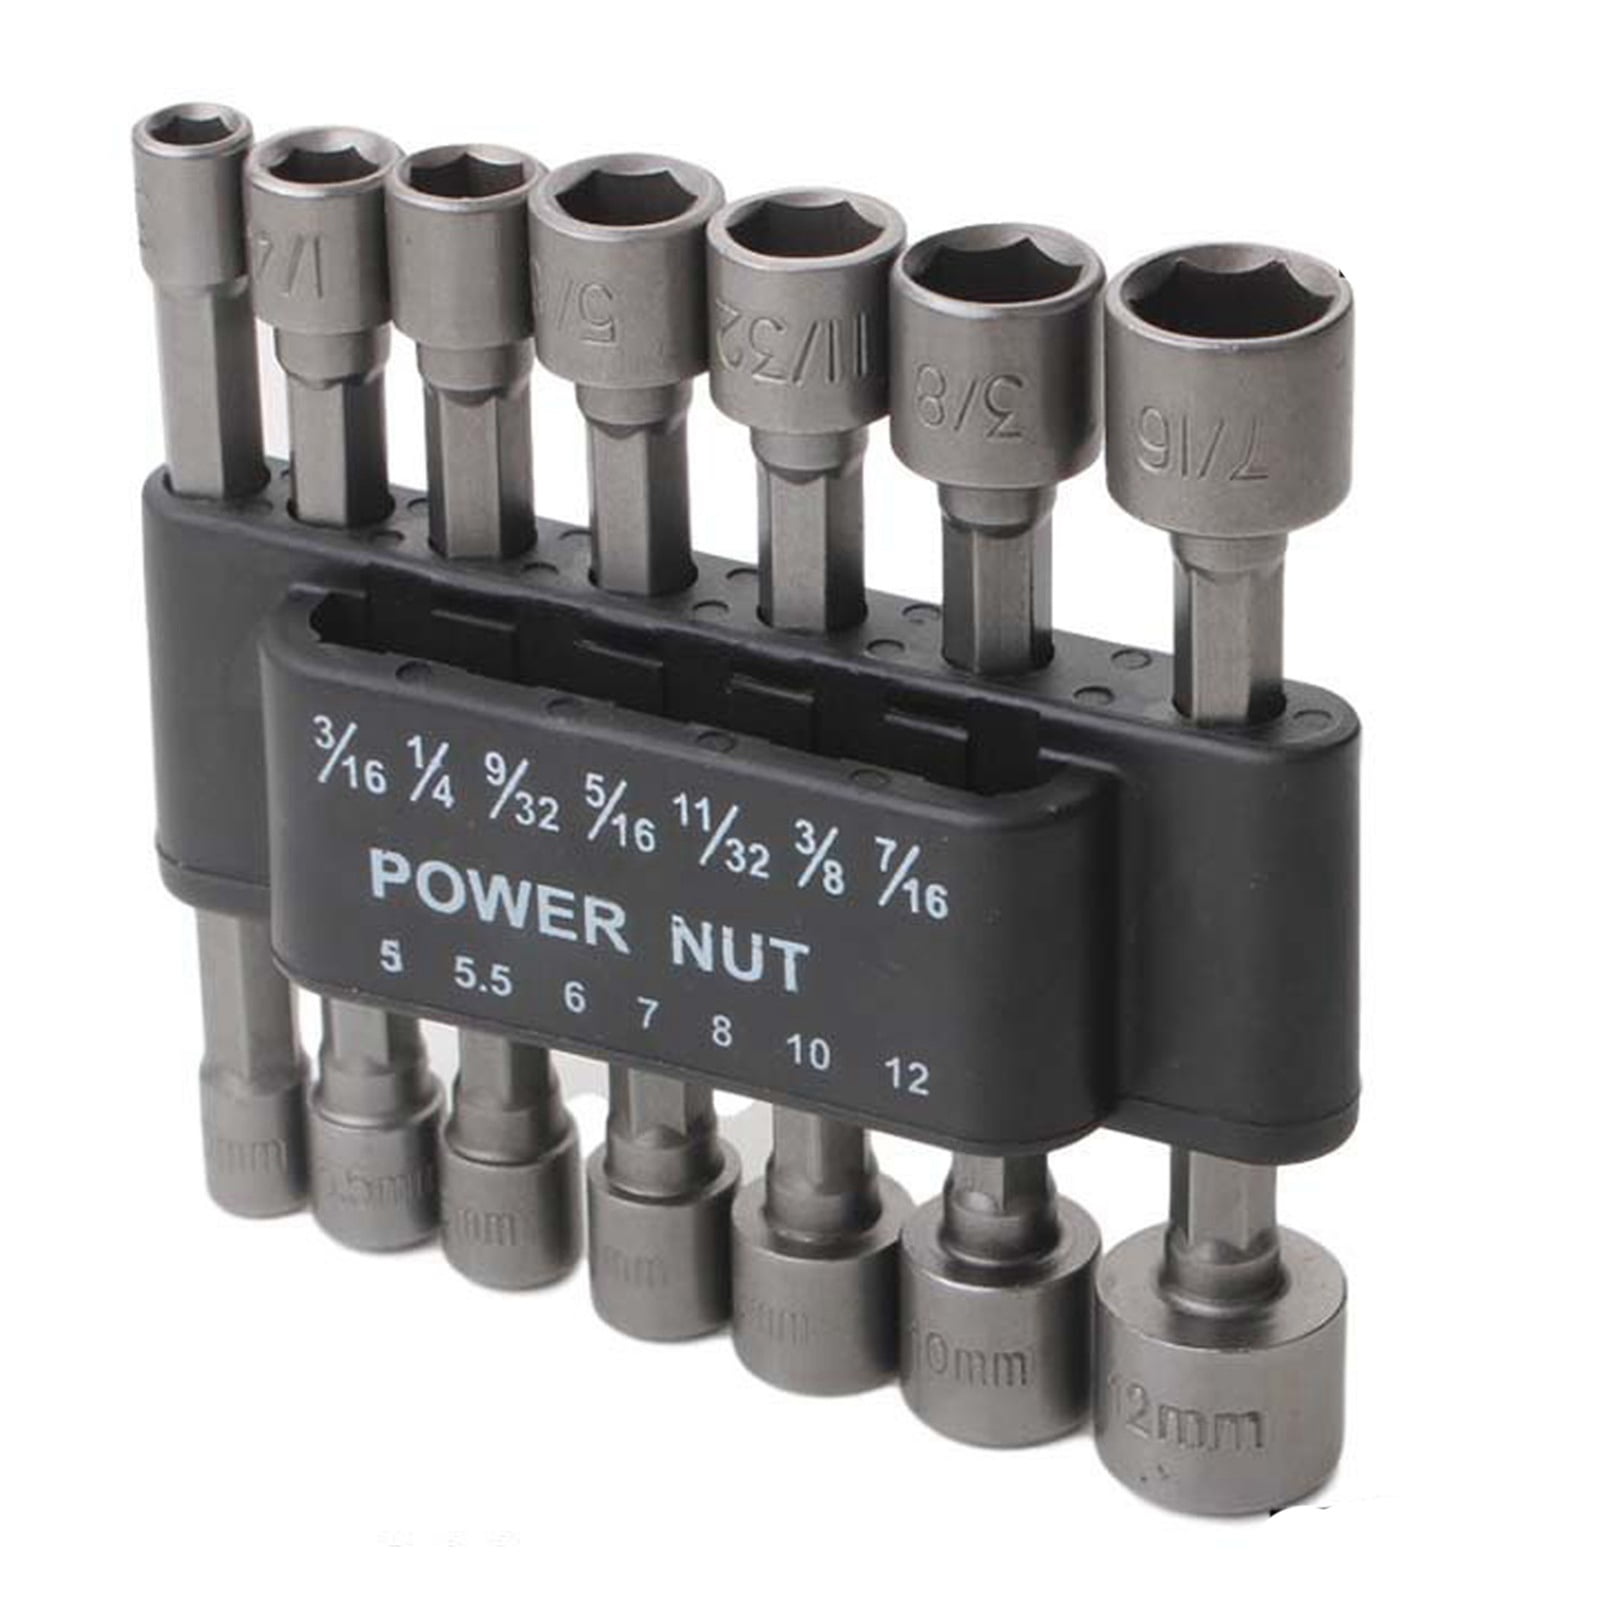 14Pieces Power Nut Driver Drill Bit Set Metric Socket Wrench Screw 1/4Hex  Shank